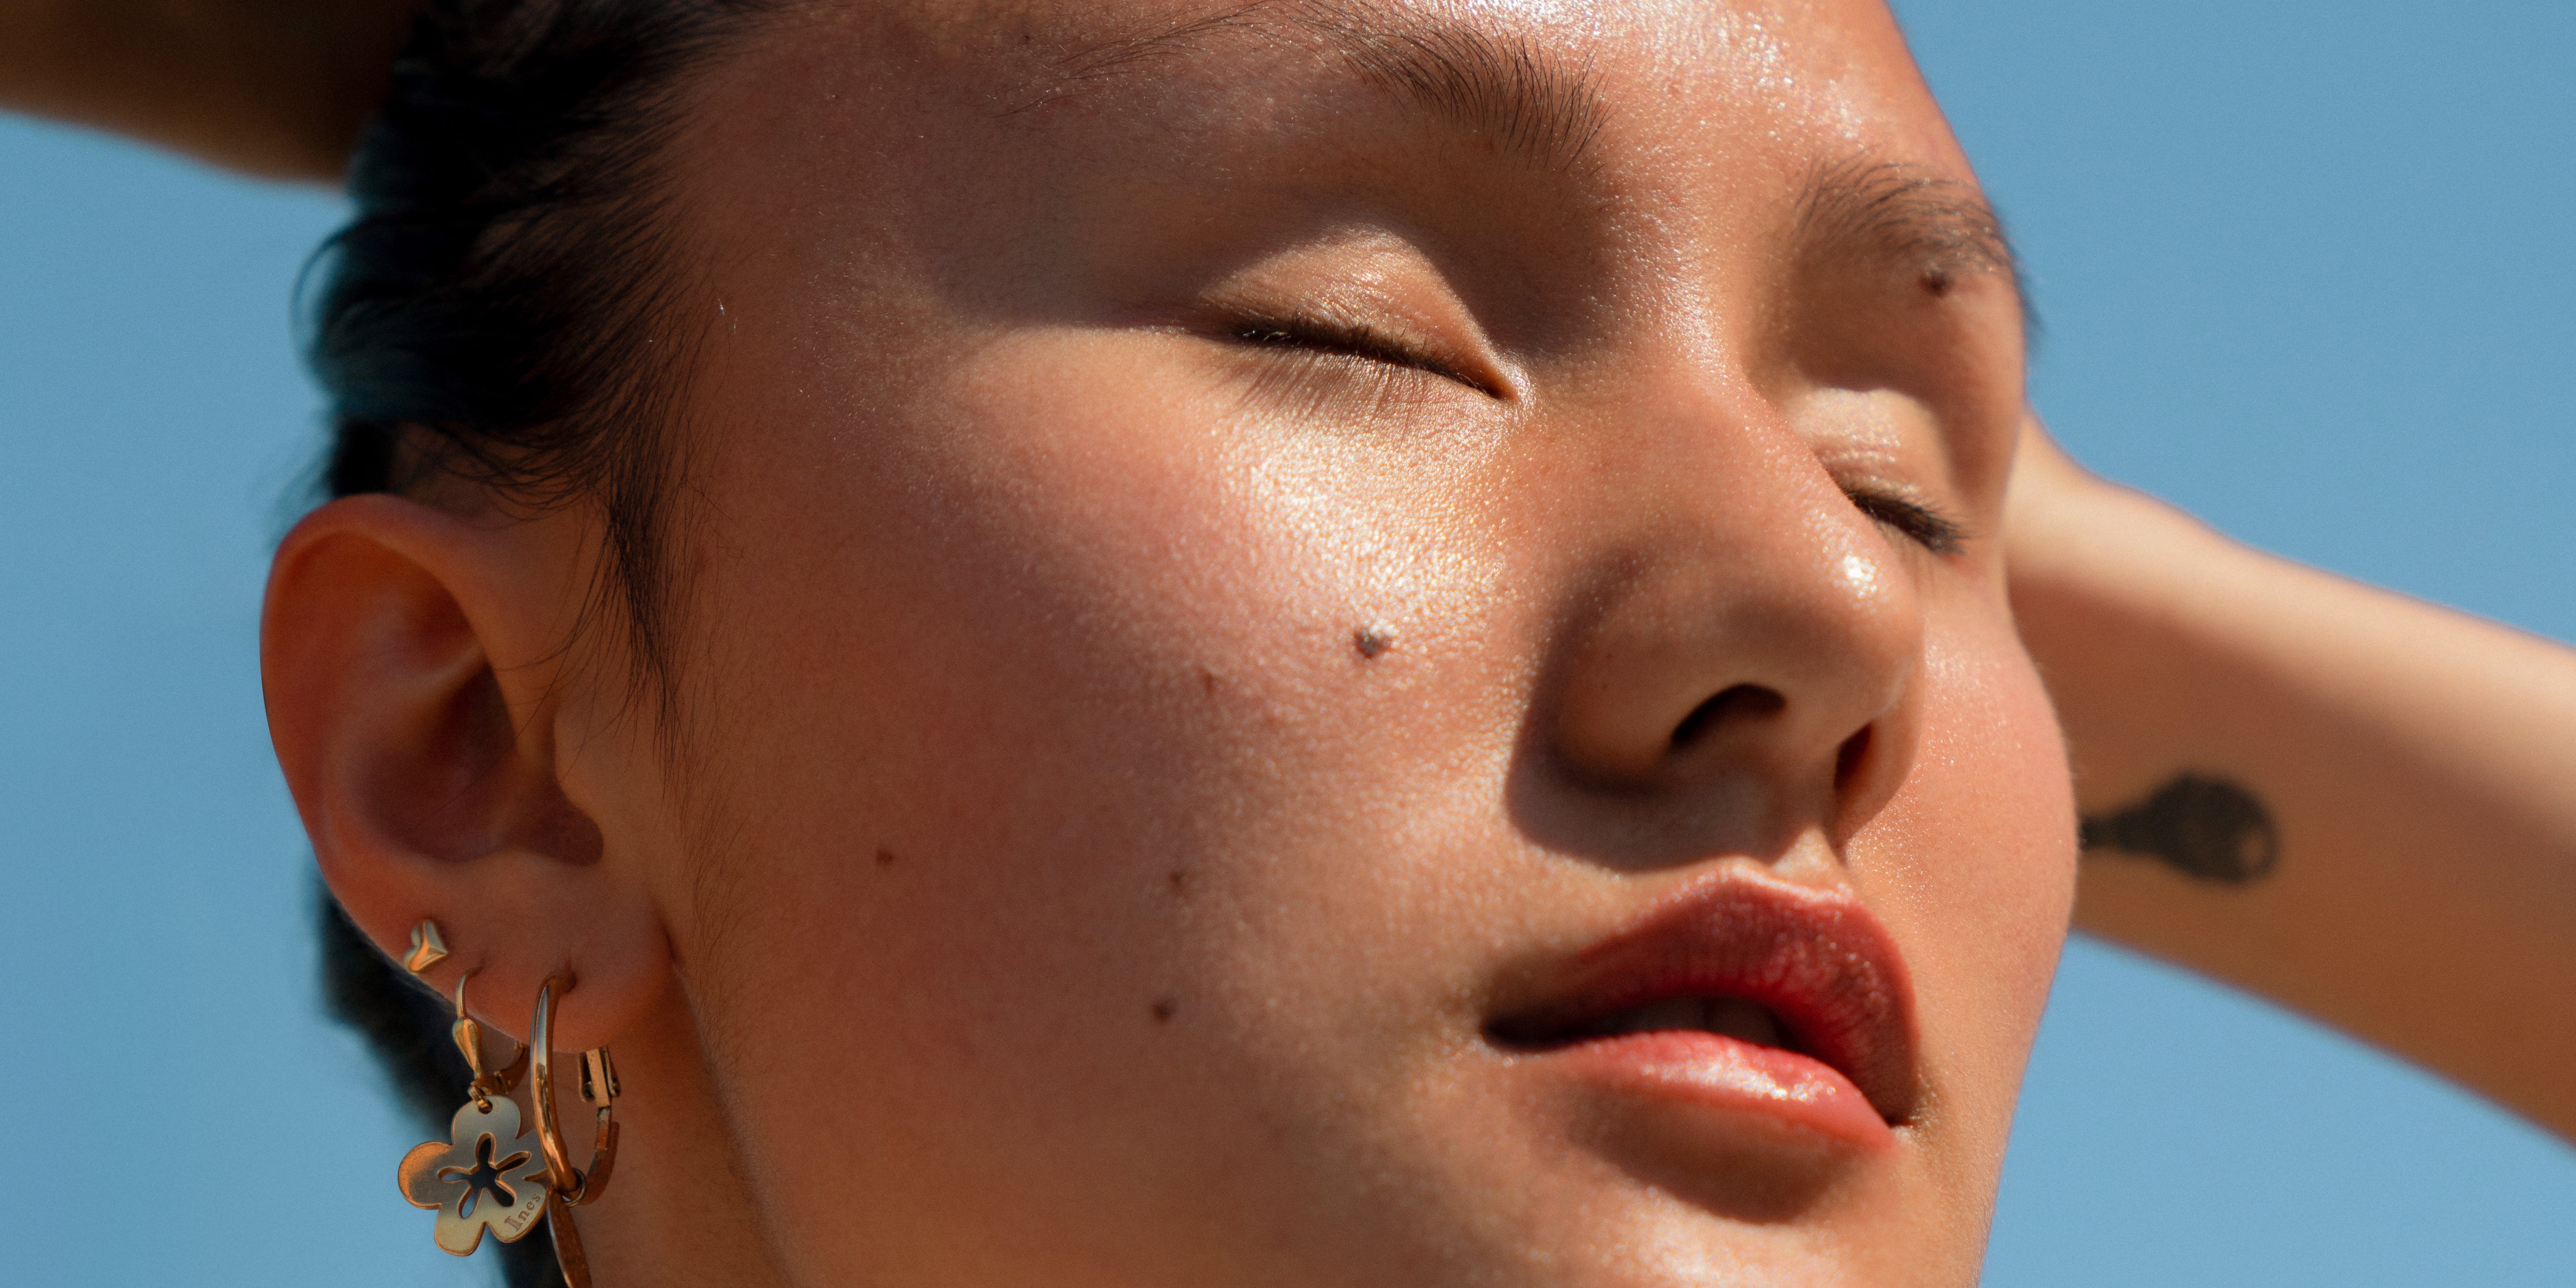 How to get plumpy skin? Getting plump, youthful skin doesn't come without work: hydration, collagen, peptides, bakuchiol or vitamin C, find out which ingredients and practices are needed to get plump skin. 